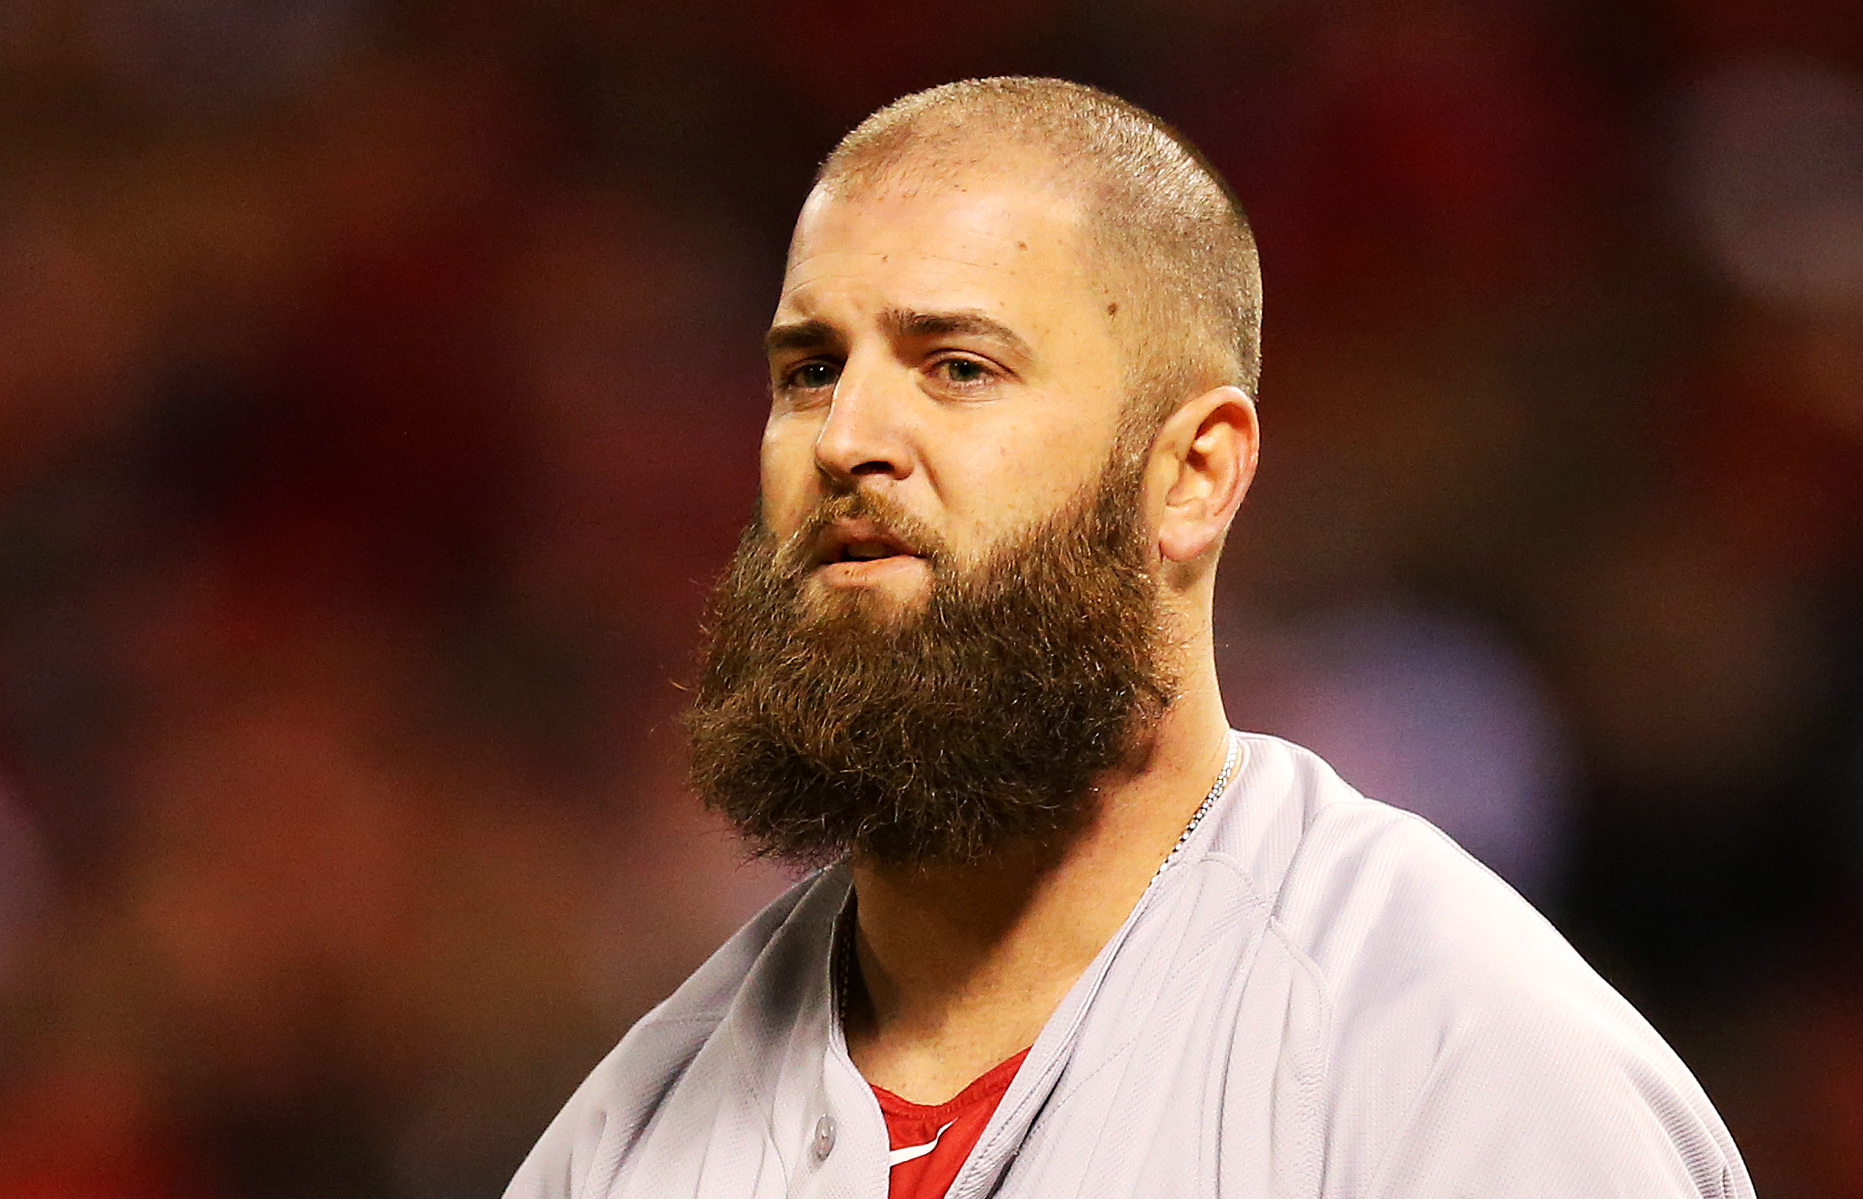 That Beard!!! Boston Red Sox's Mike Napoli watches batting